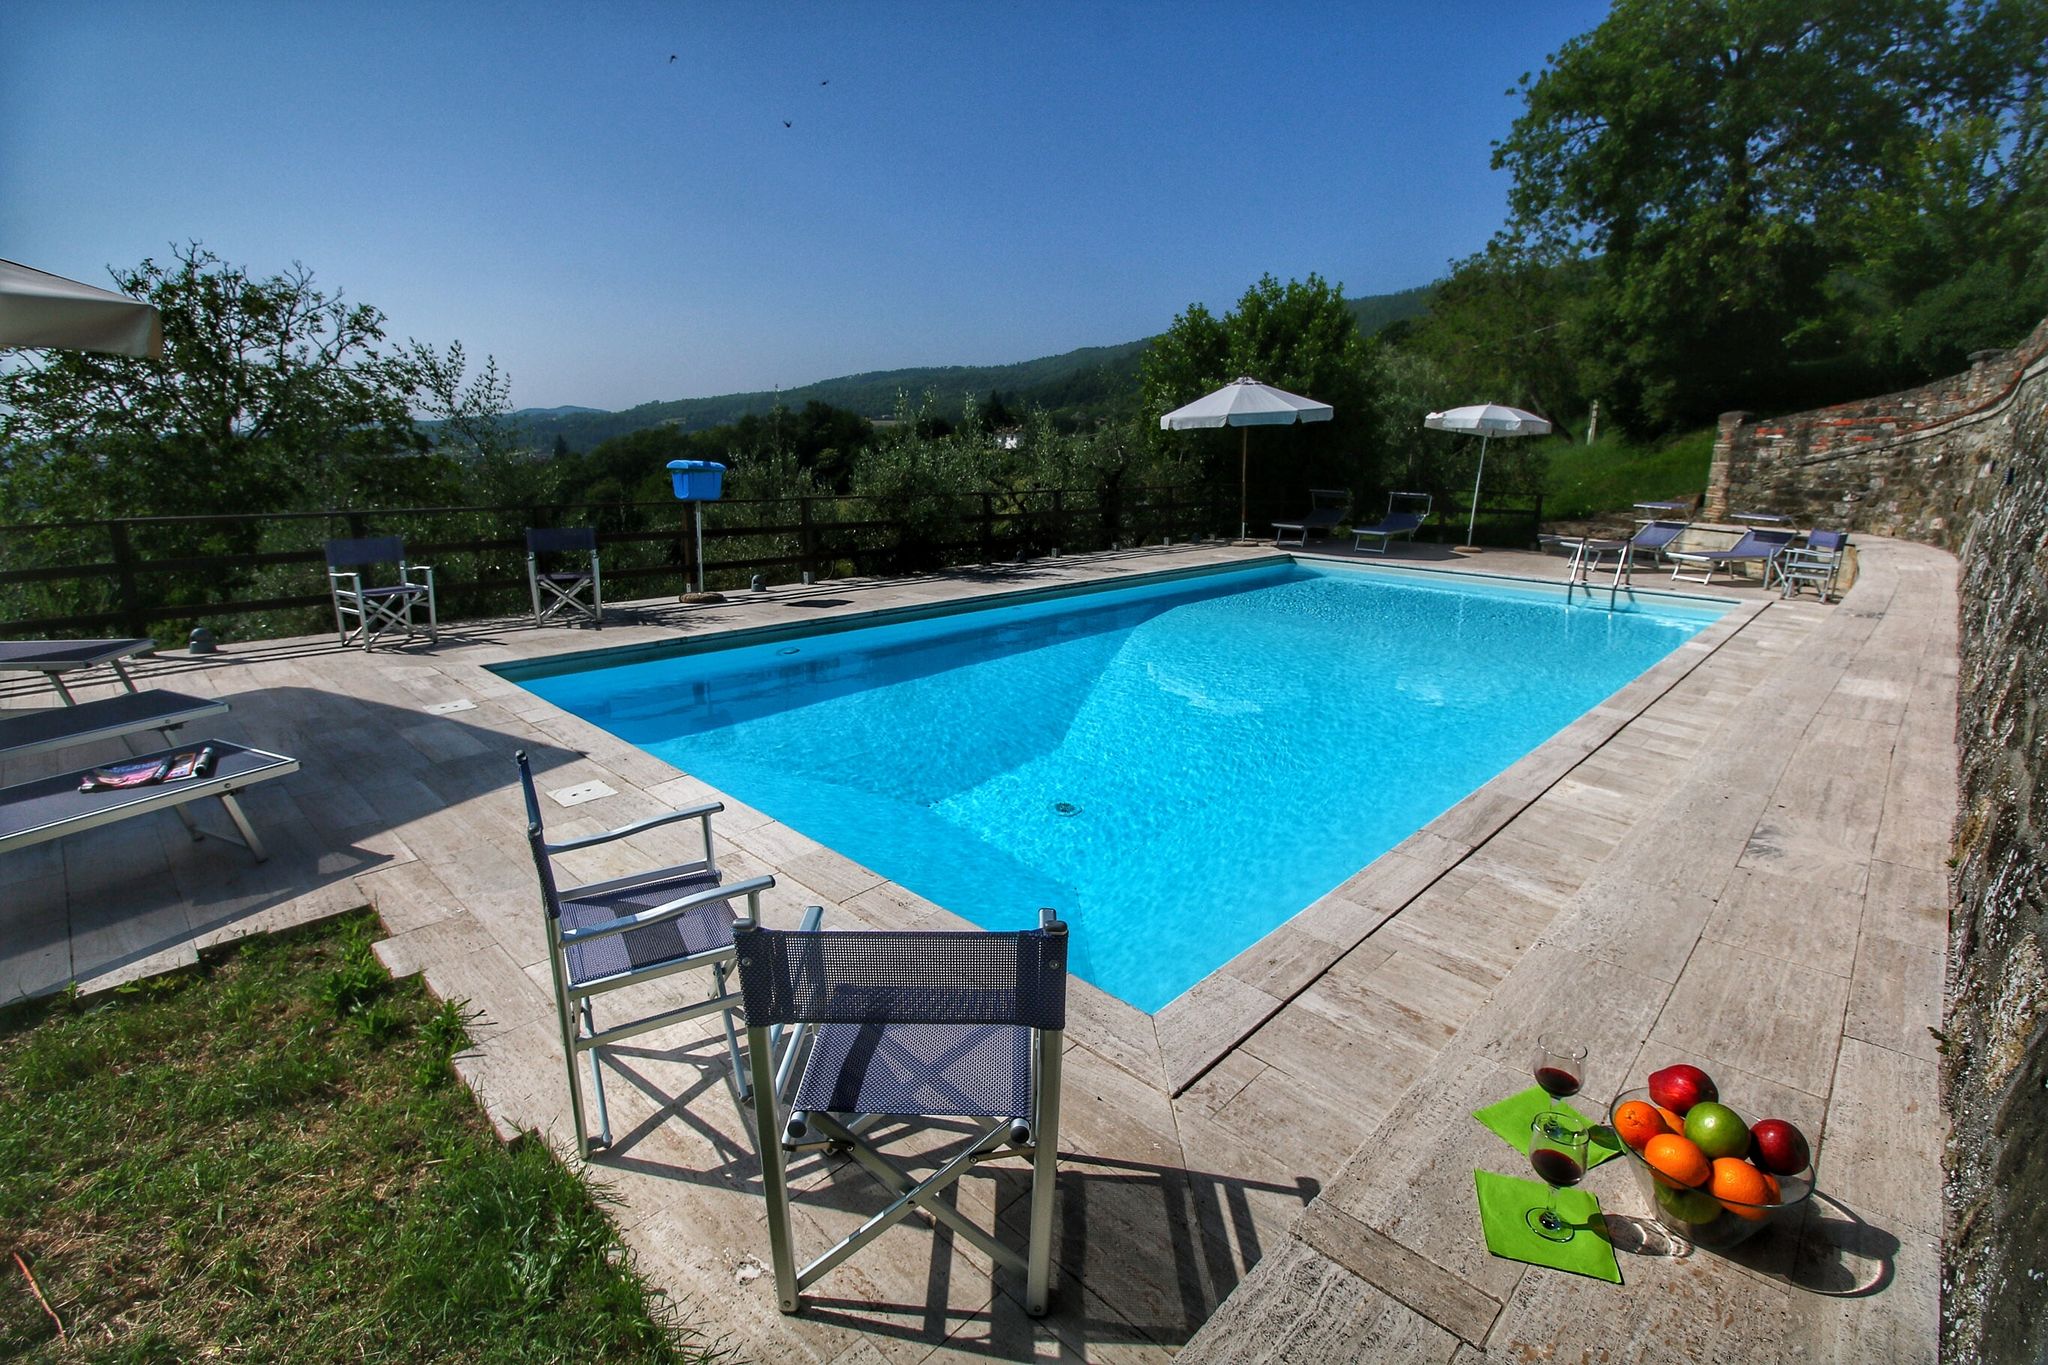 Historic farmhouse with swimming pool, in Michelangelo's places